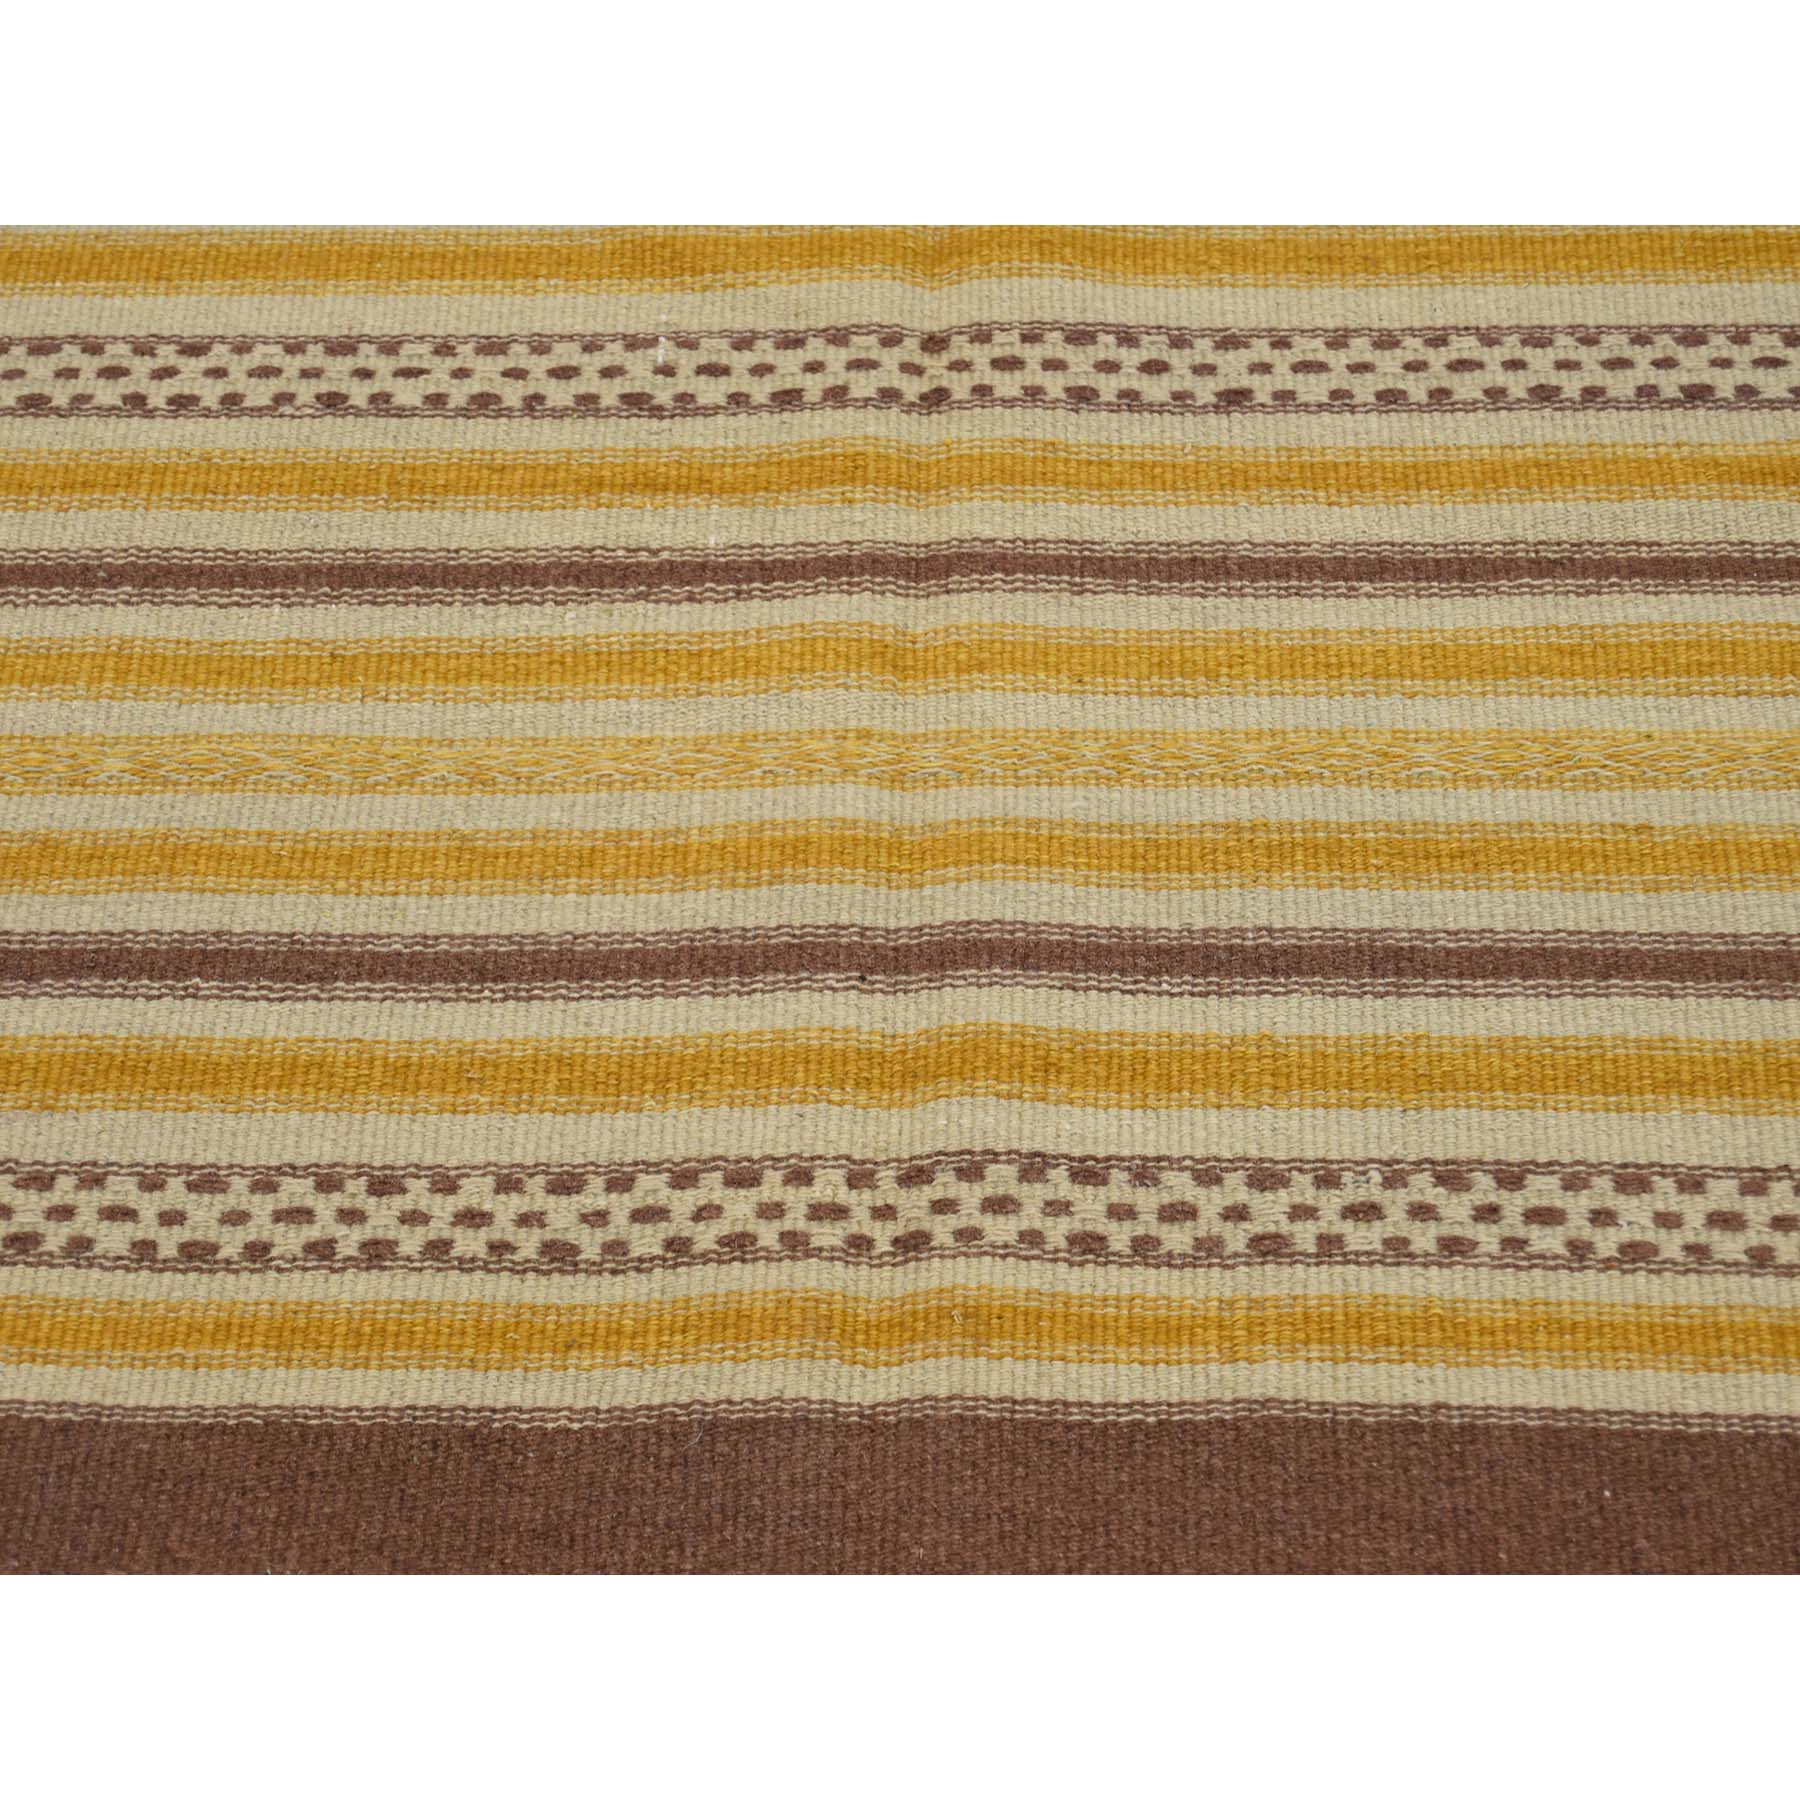 2-10--x5- Hand Woven Striped Durie Kilim Reversible Flat Weave Rug 